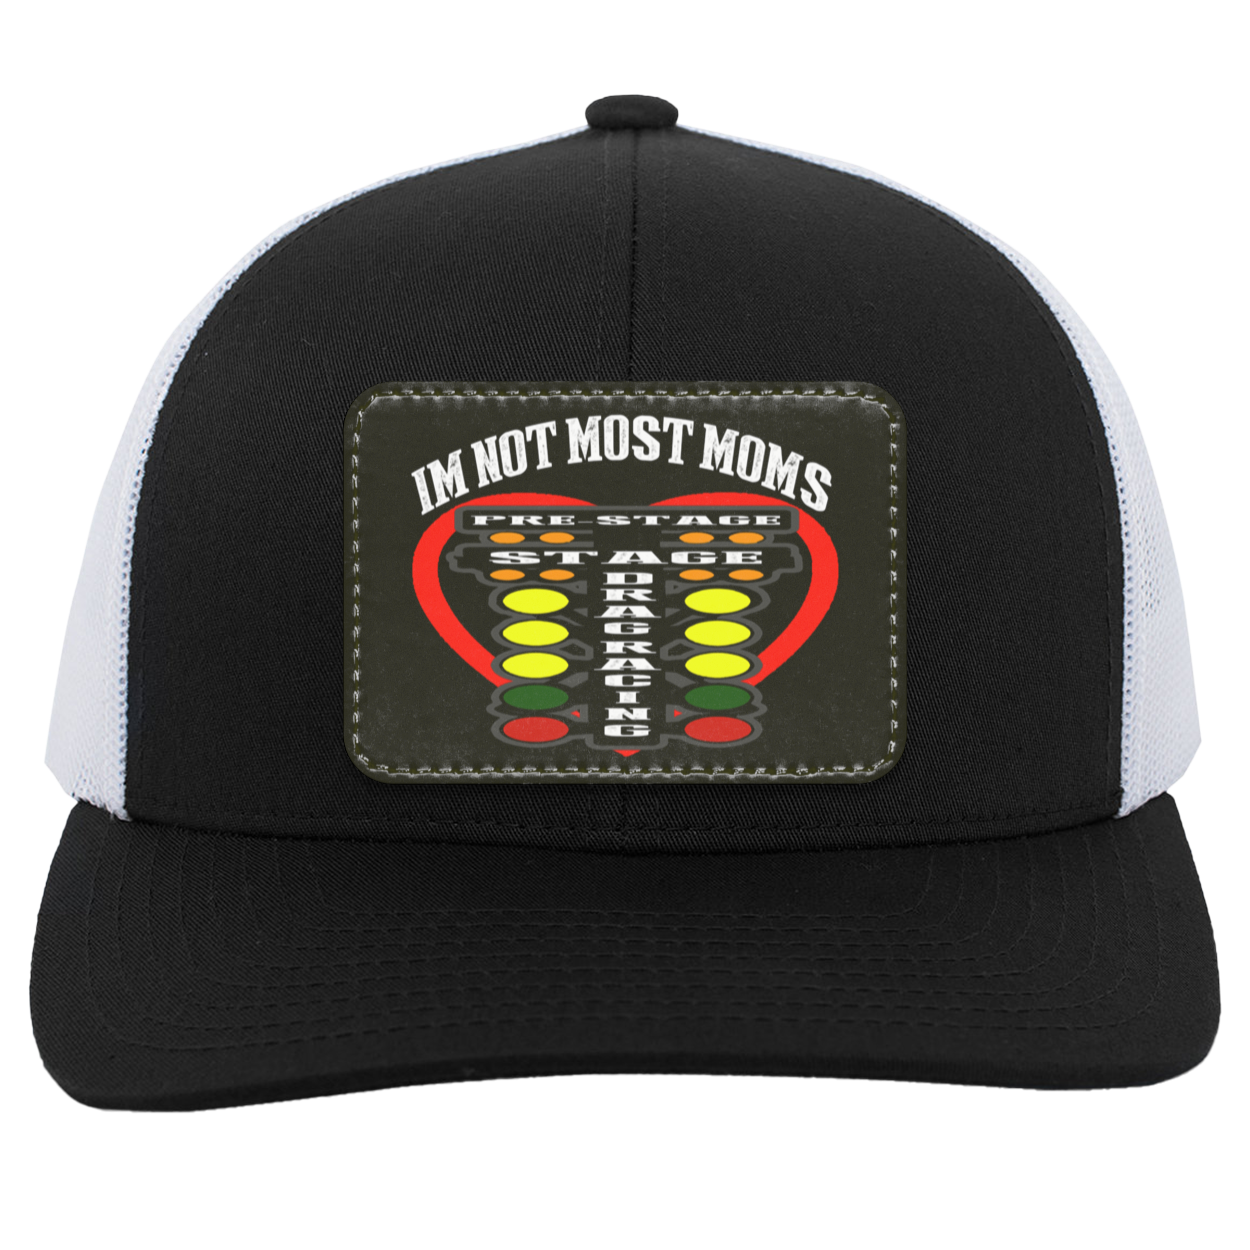 I'm Not Most Moms Drag Racing Trucker Snap Back - Patch